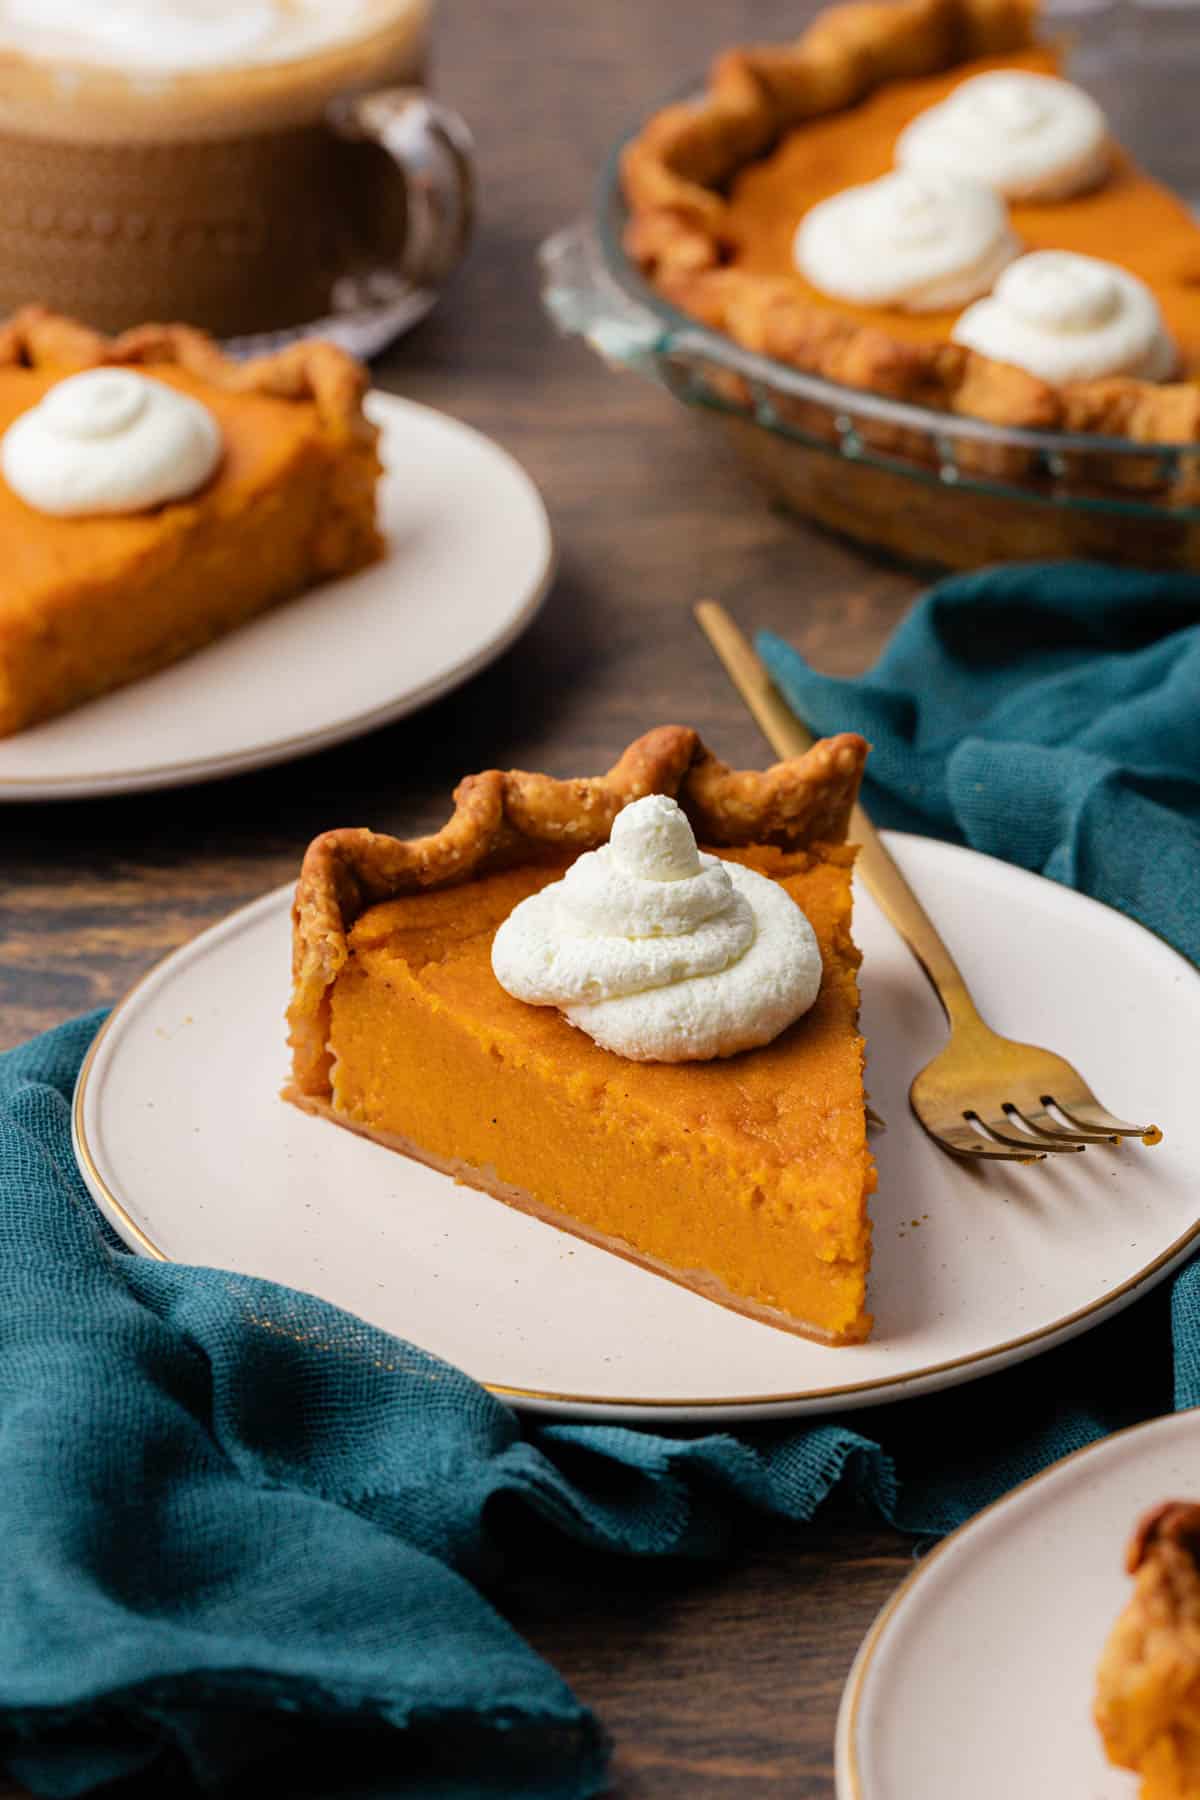 slices of sweet potato pie on white plates topped with dollops of whipped cream, with a fork sitting beside the pie on the front plate and a dark teal towel underneath the plate